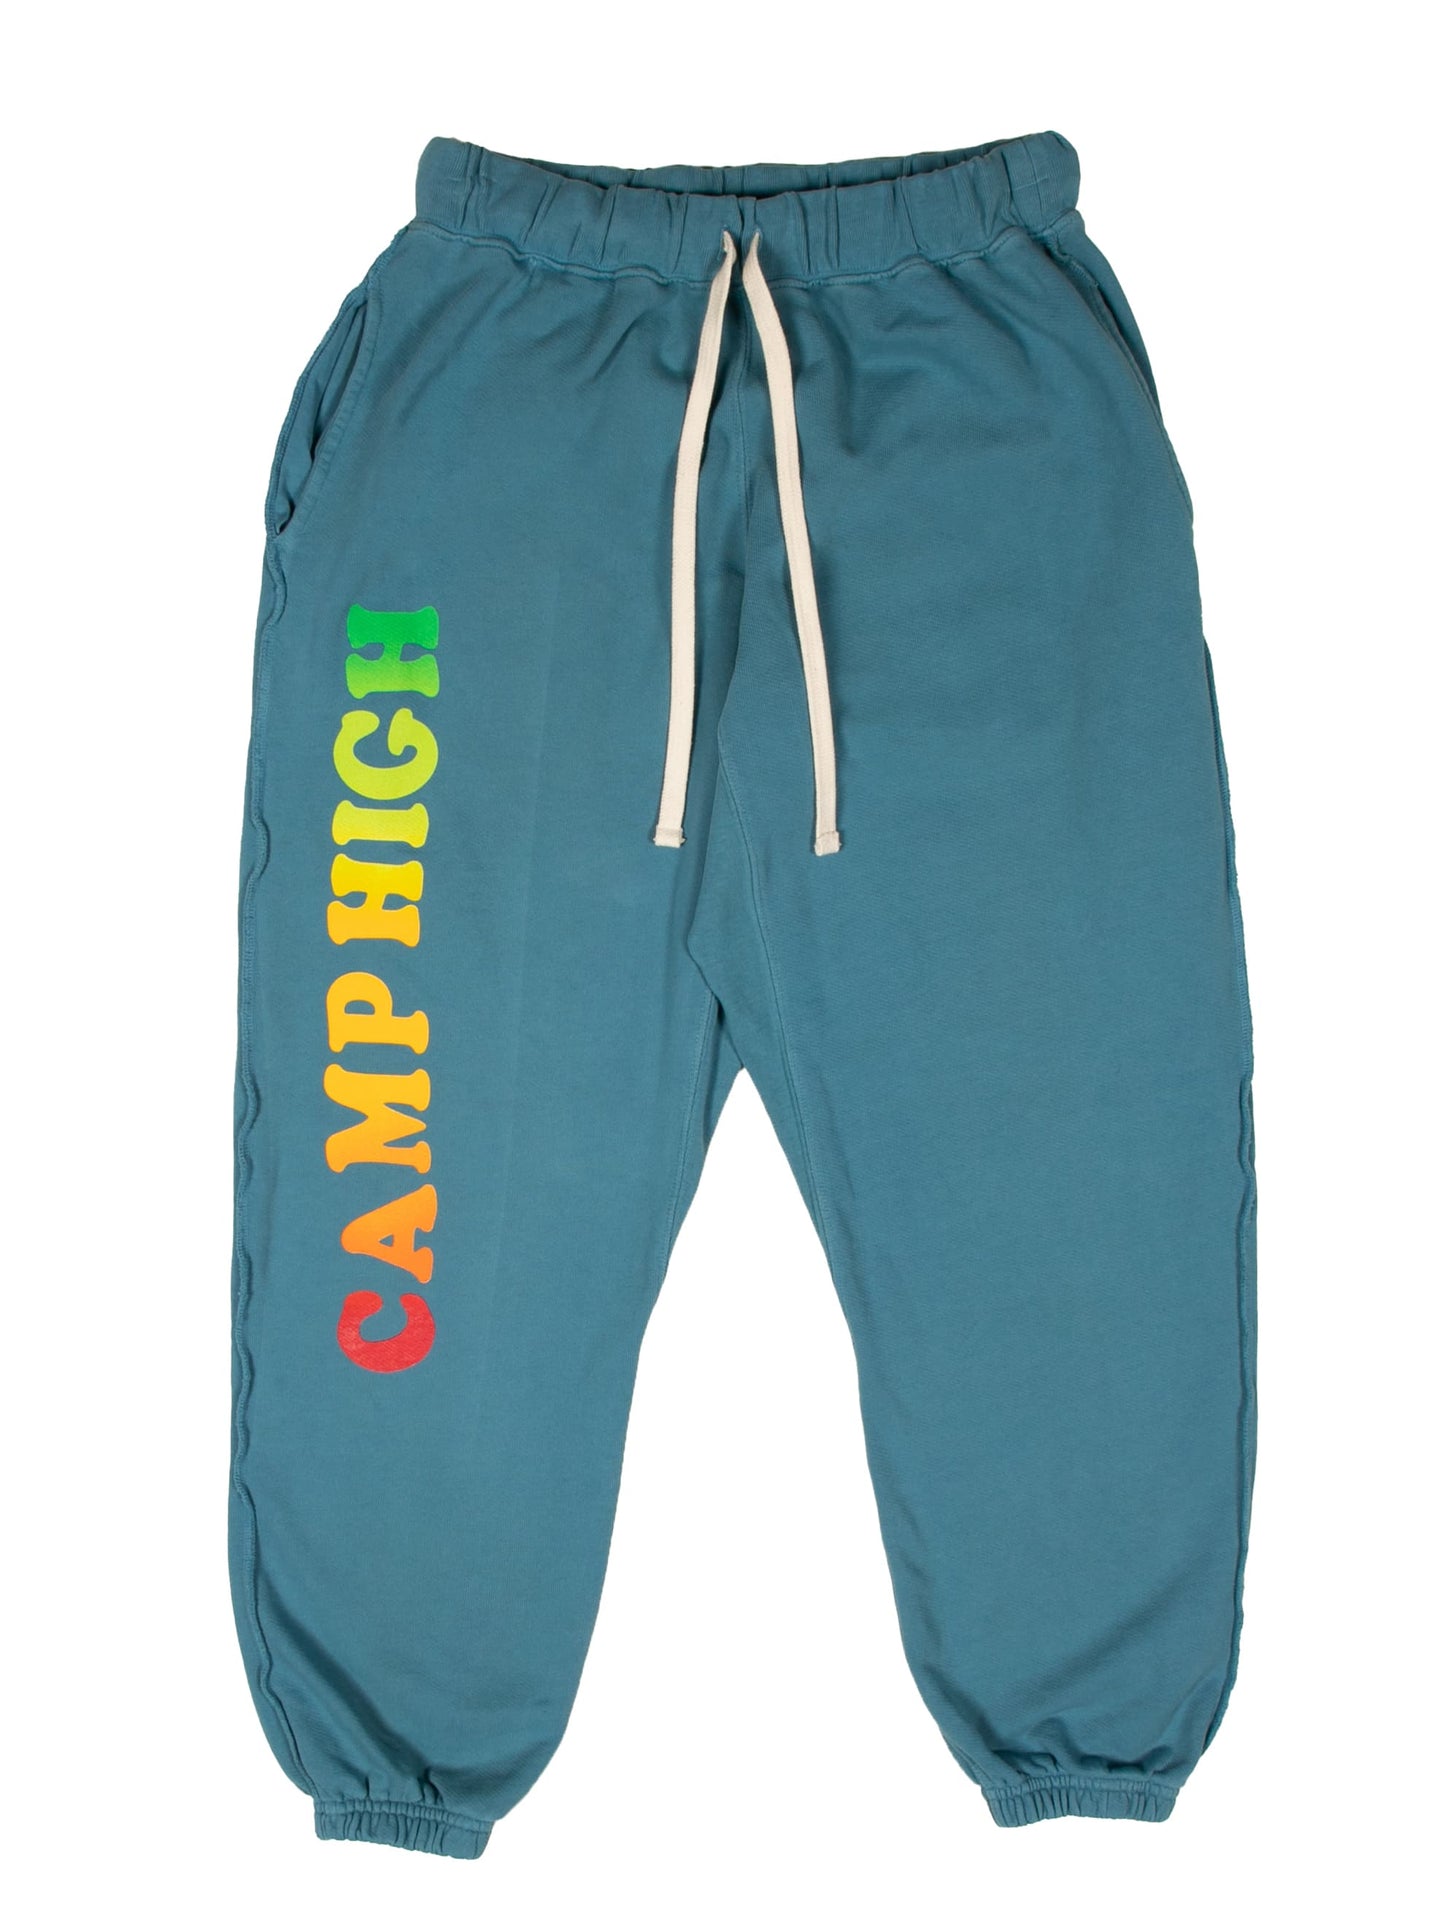 Camp High Slate Blue / Small Counselor Pant